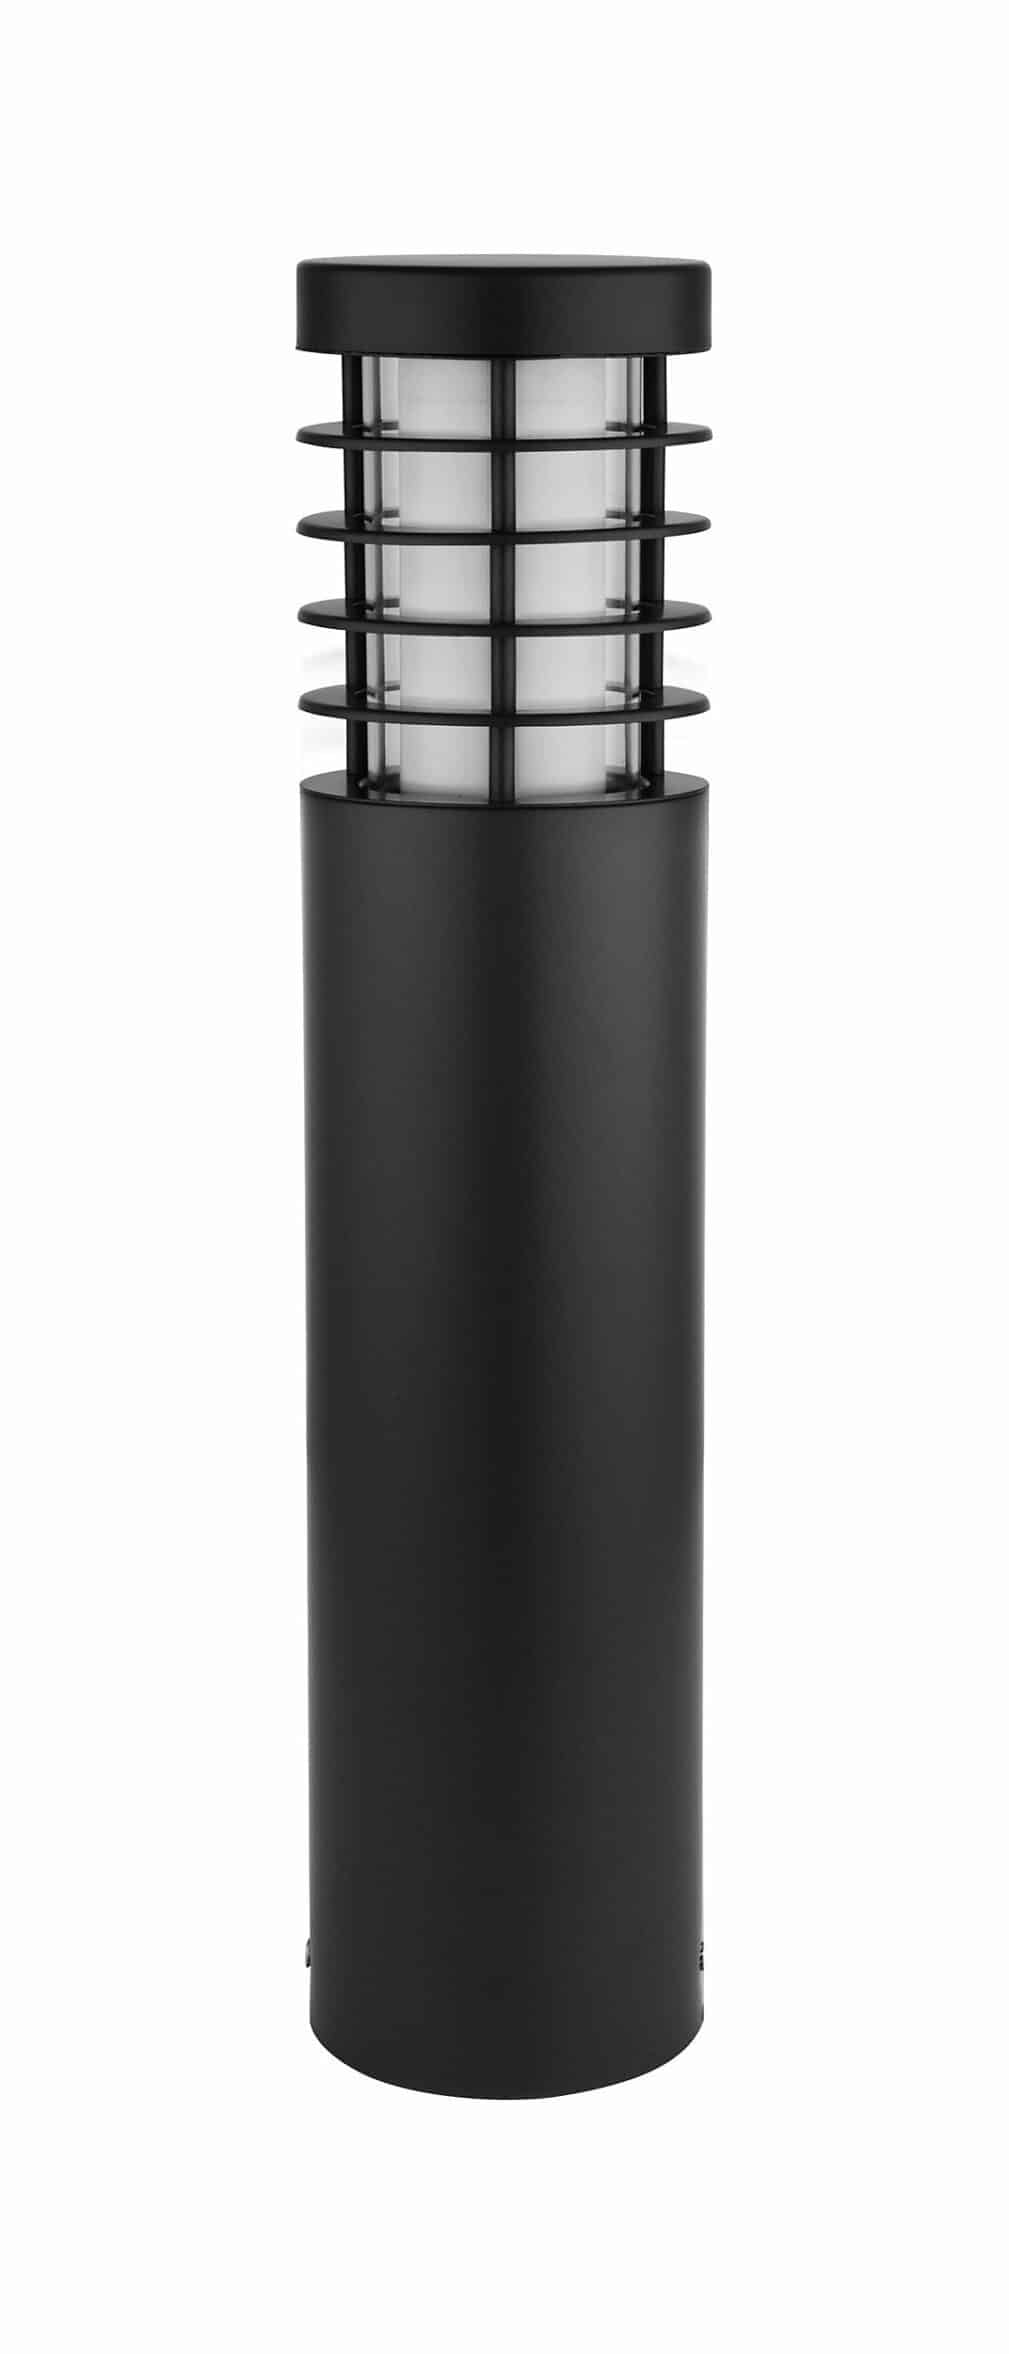 GoodHome Black Mains-powered 1 lamp Integrated LED Outdoor Post light (H)440mm 7335